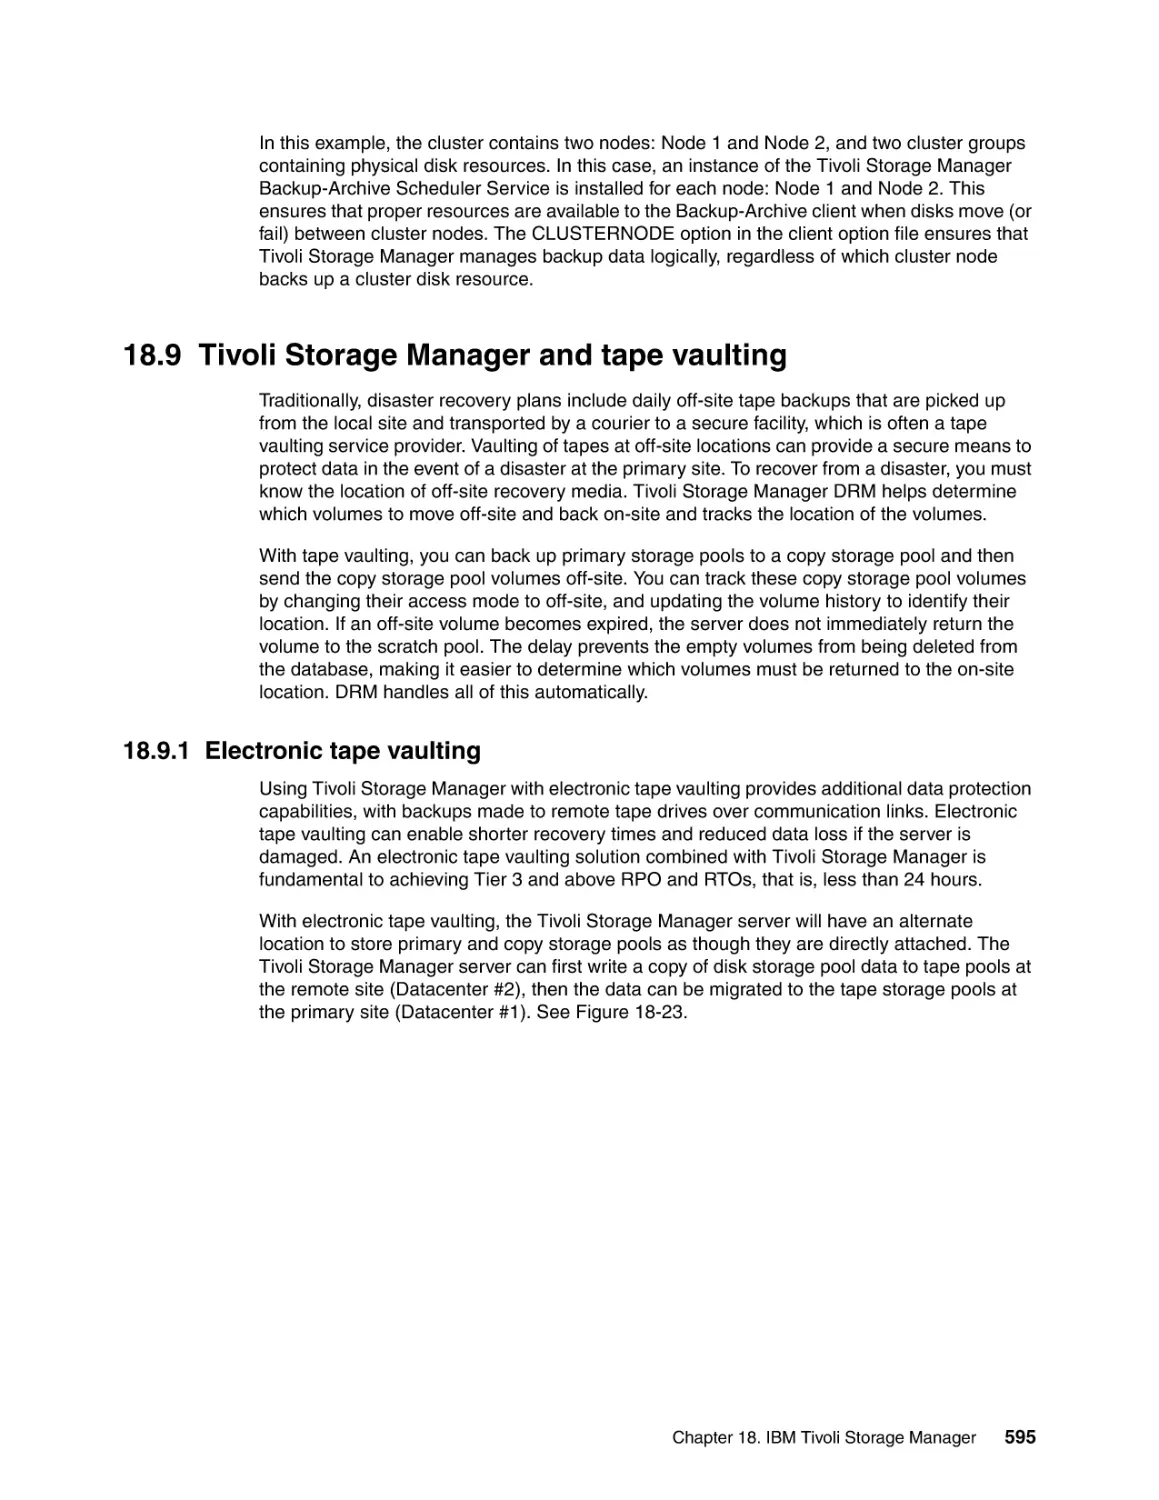 18.9 Tivoli Storage Manager and tape vaulting
18.9.1 Electronic tape vaulting